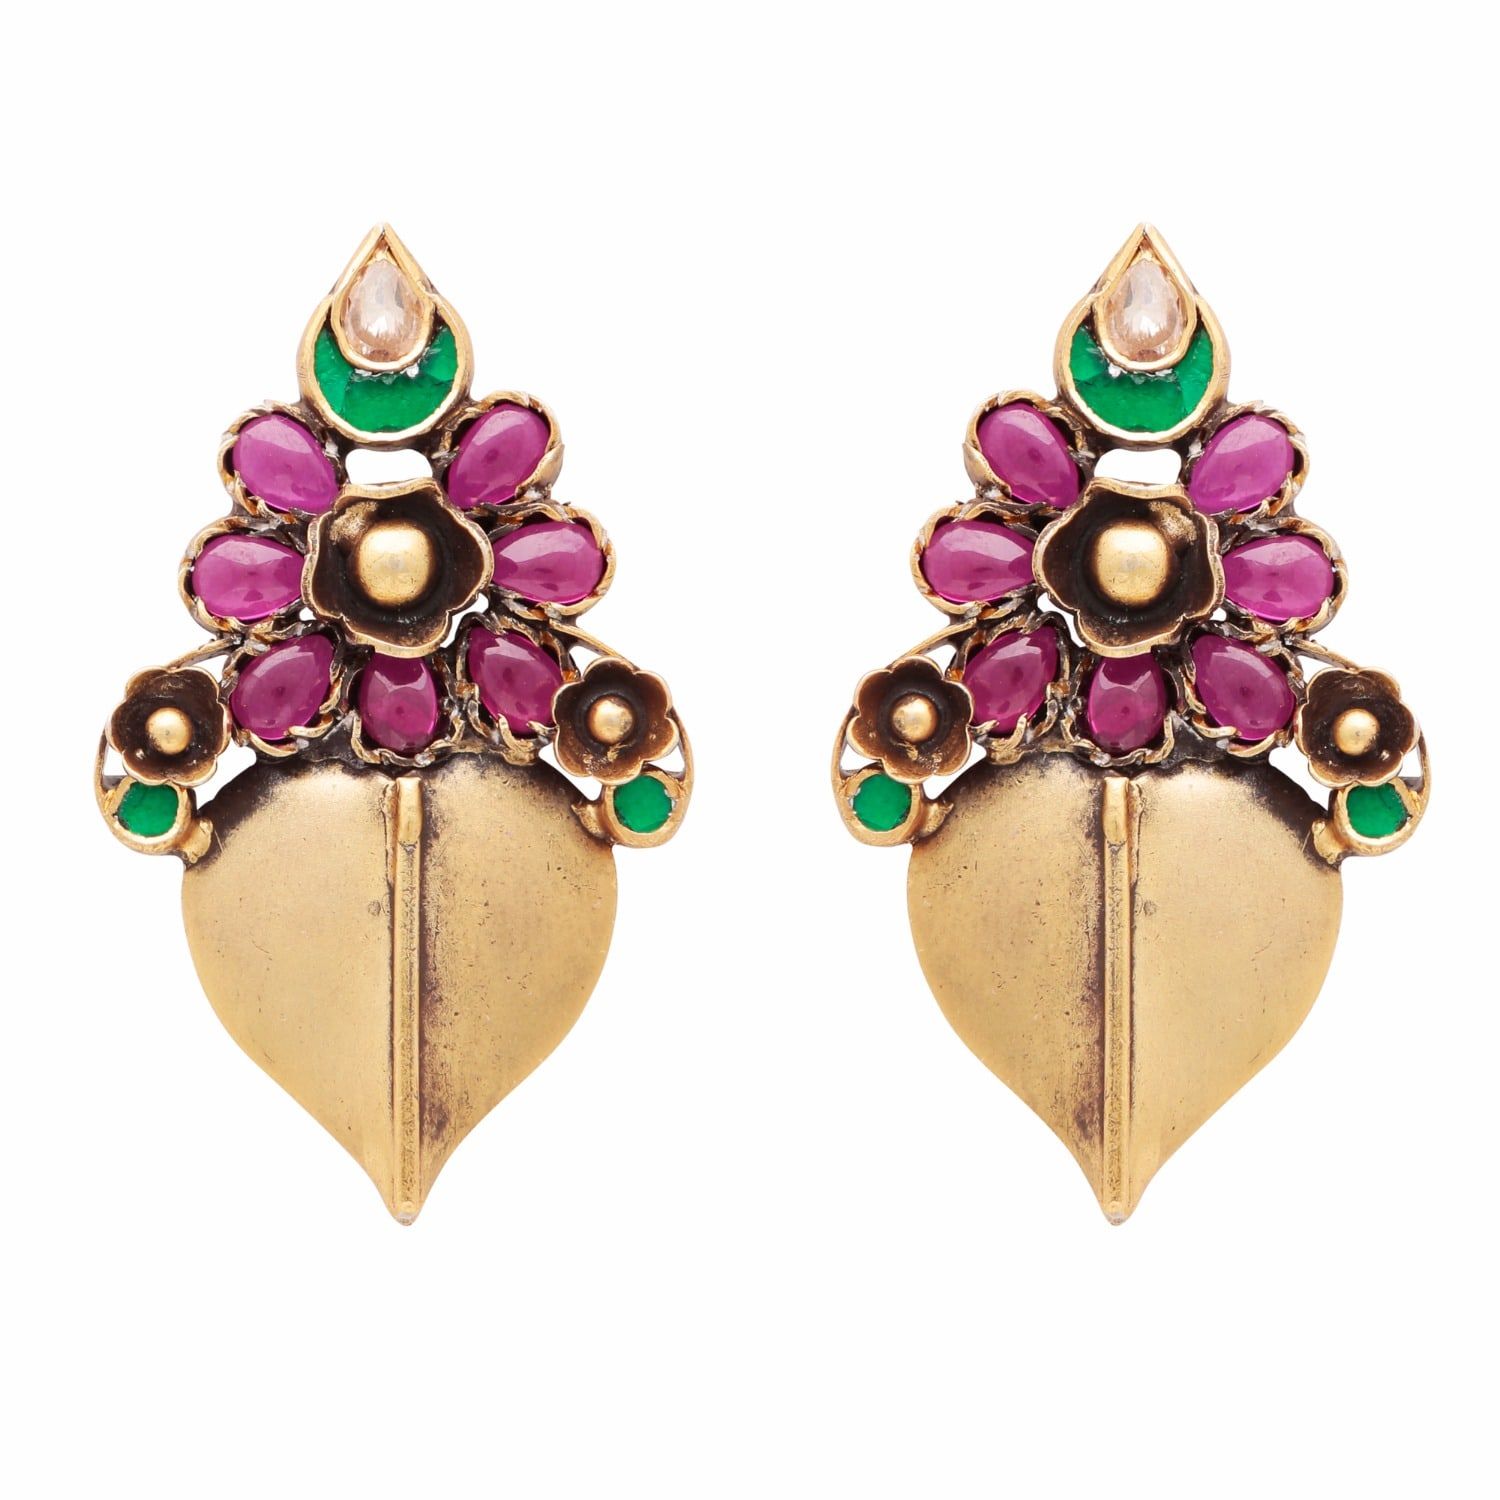 Carousel Jewels - Green & Pink Dyed Crystal Earrings | Wolf & Badger (US)